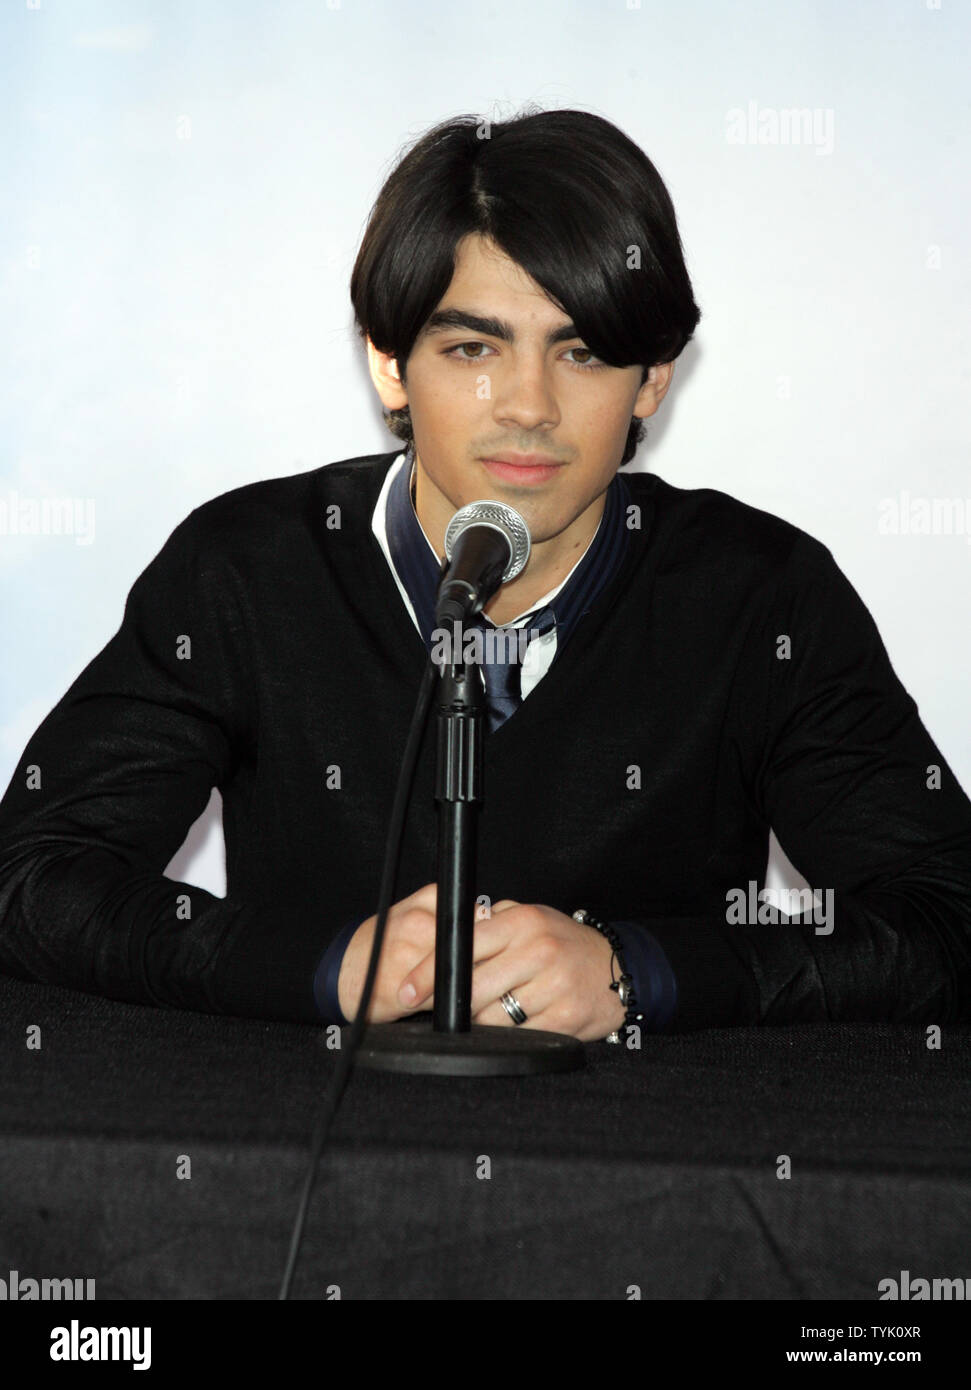 The Jonas Brothers' Joe Jonas attends a press conference about embarking on their 'Surprise Theater Invasion' at the Westchester Airport in New York on February 28, 2009.  (UPI Photo/Laura Cavanaugh) Stock Photo